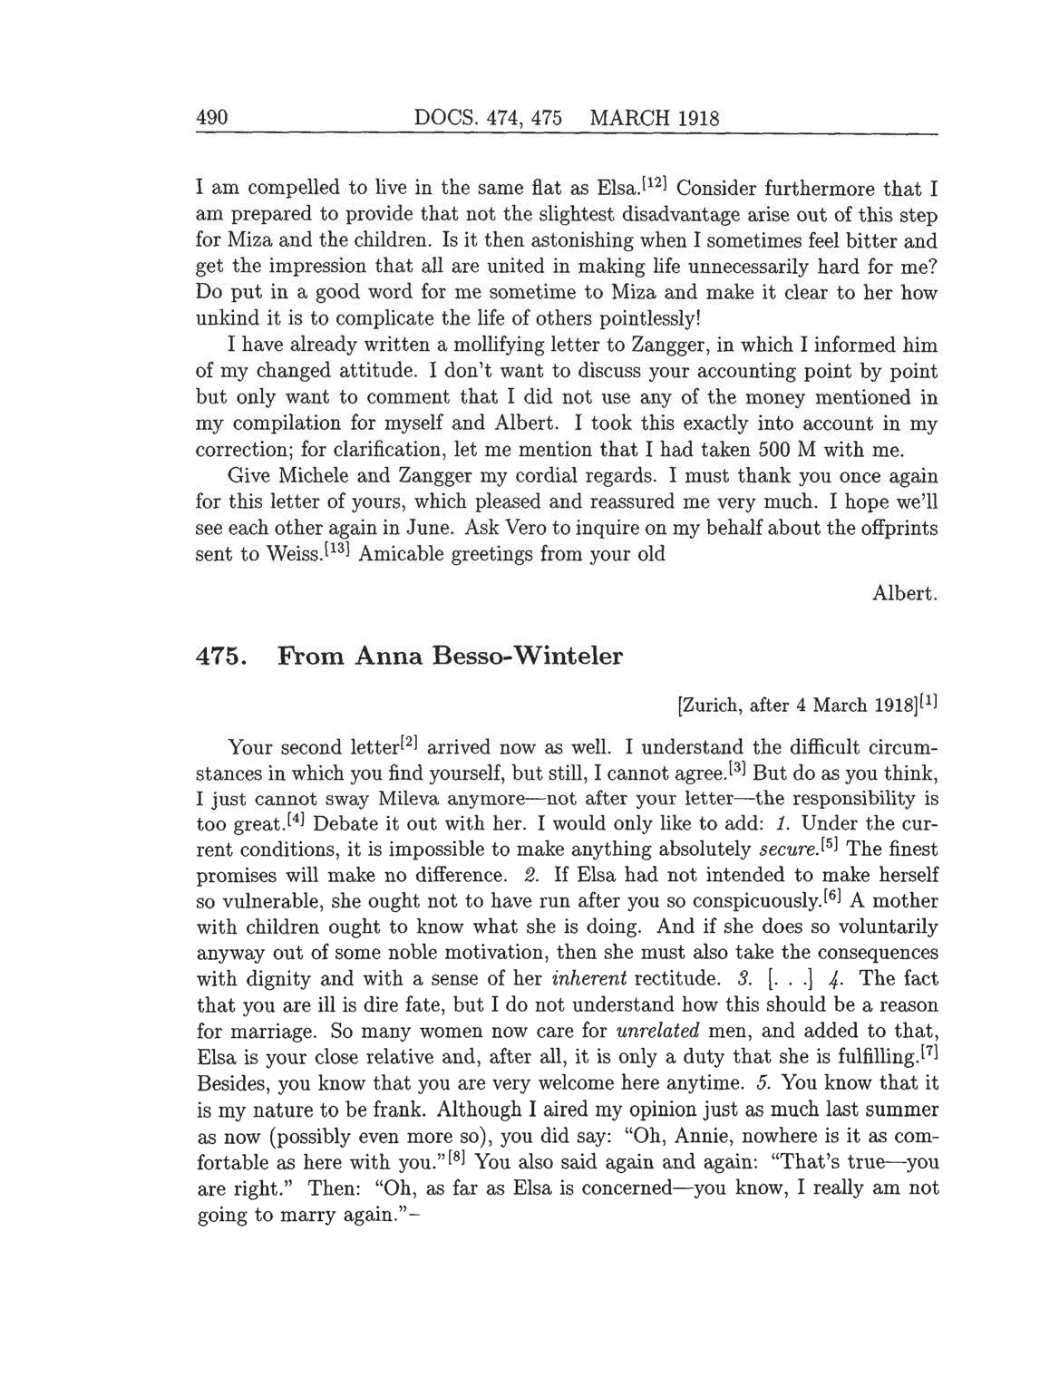 Volume 8: The Berlin Years: Correspondence, 1914-1918 (English translation supplement) page 490